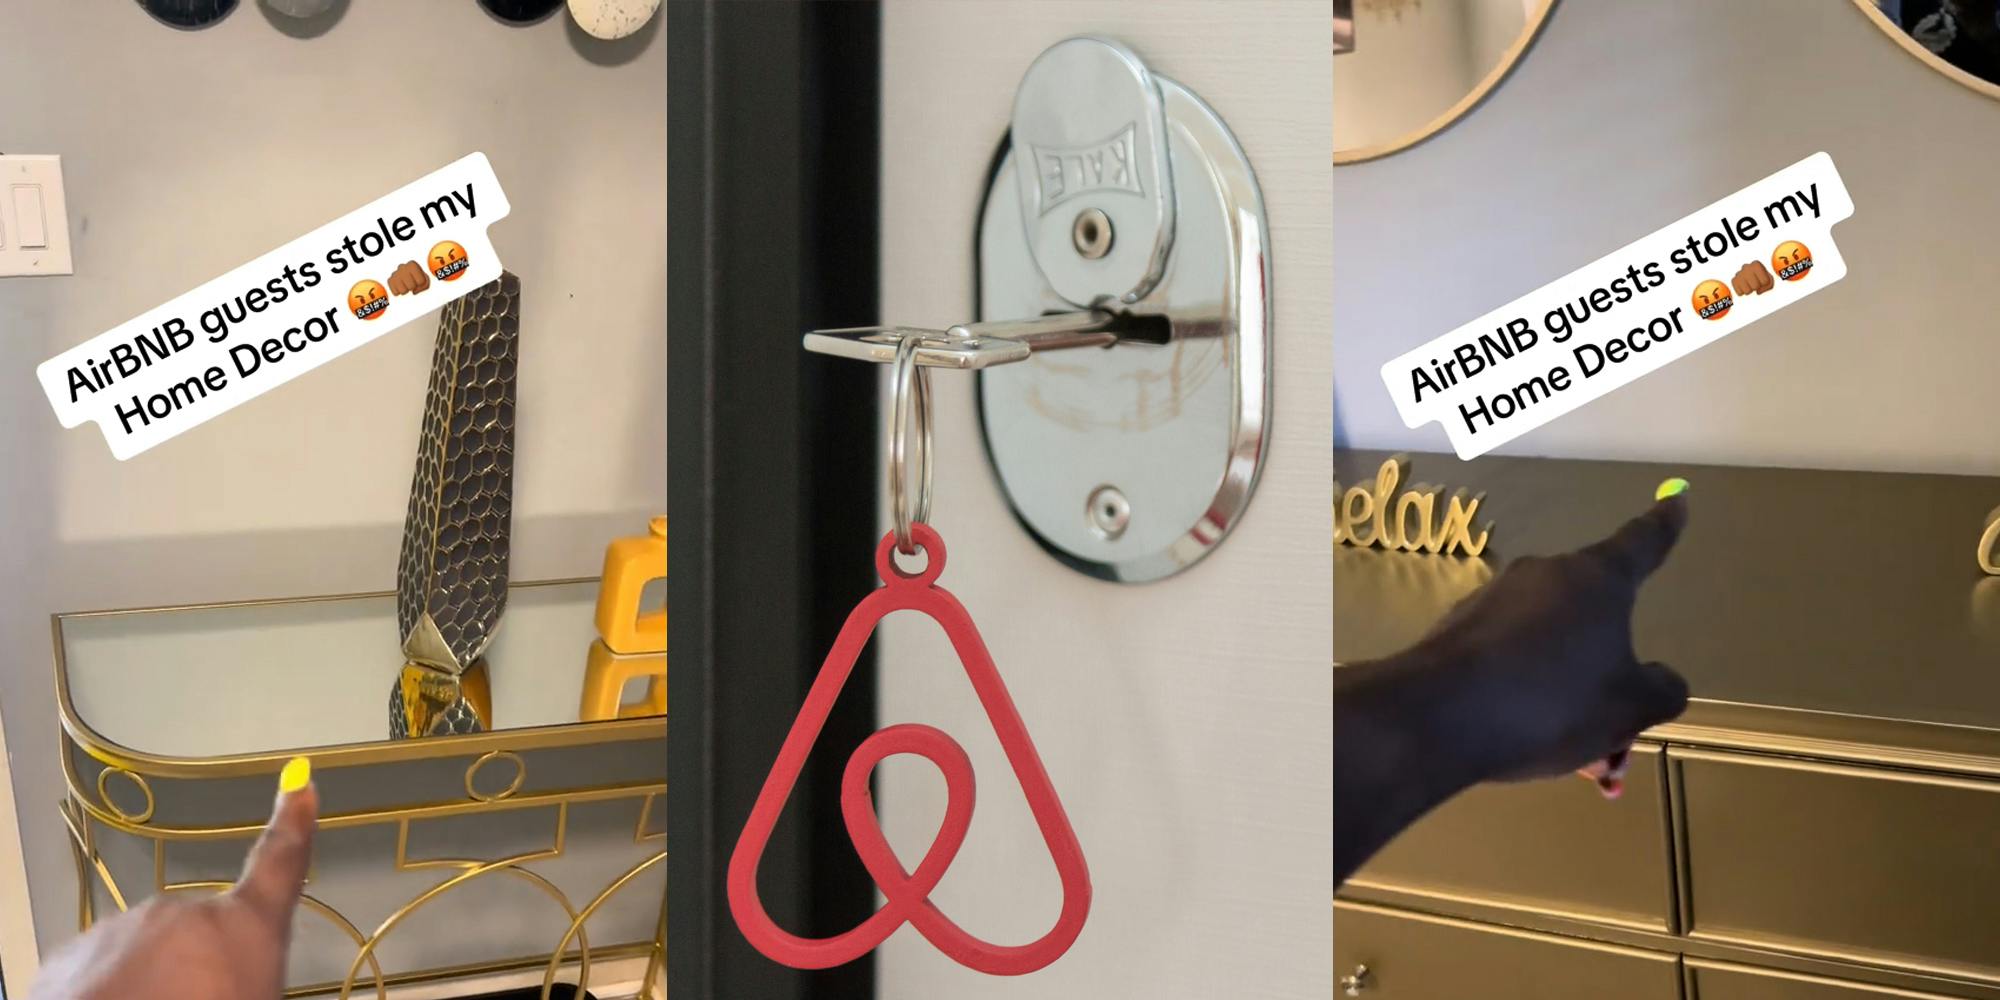 Airbnb host in home pointing to table area with missing decor spot with caption "AirBNB guests stole my Home Decor" (l) Airbnb logo on keys un door lock (c) Airbnb host in home pointing to table area with missing decor spot with caption "AirBNB guests stole my Home Decor" (r)